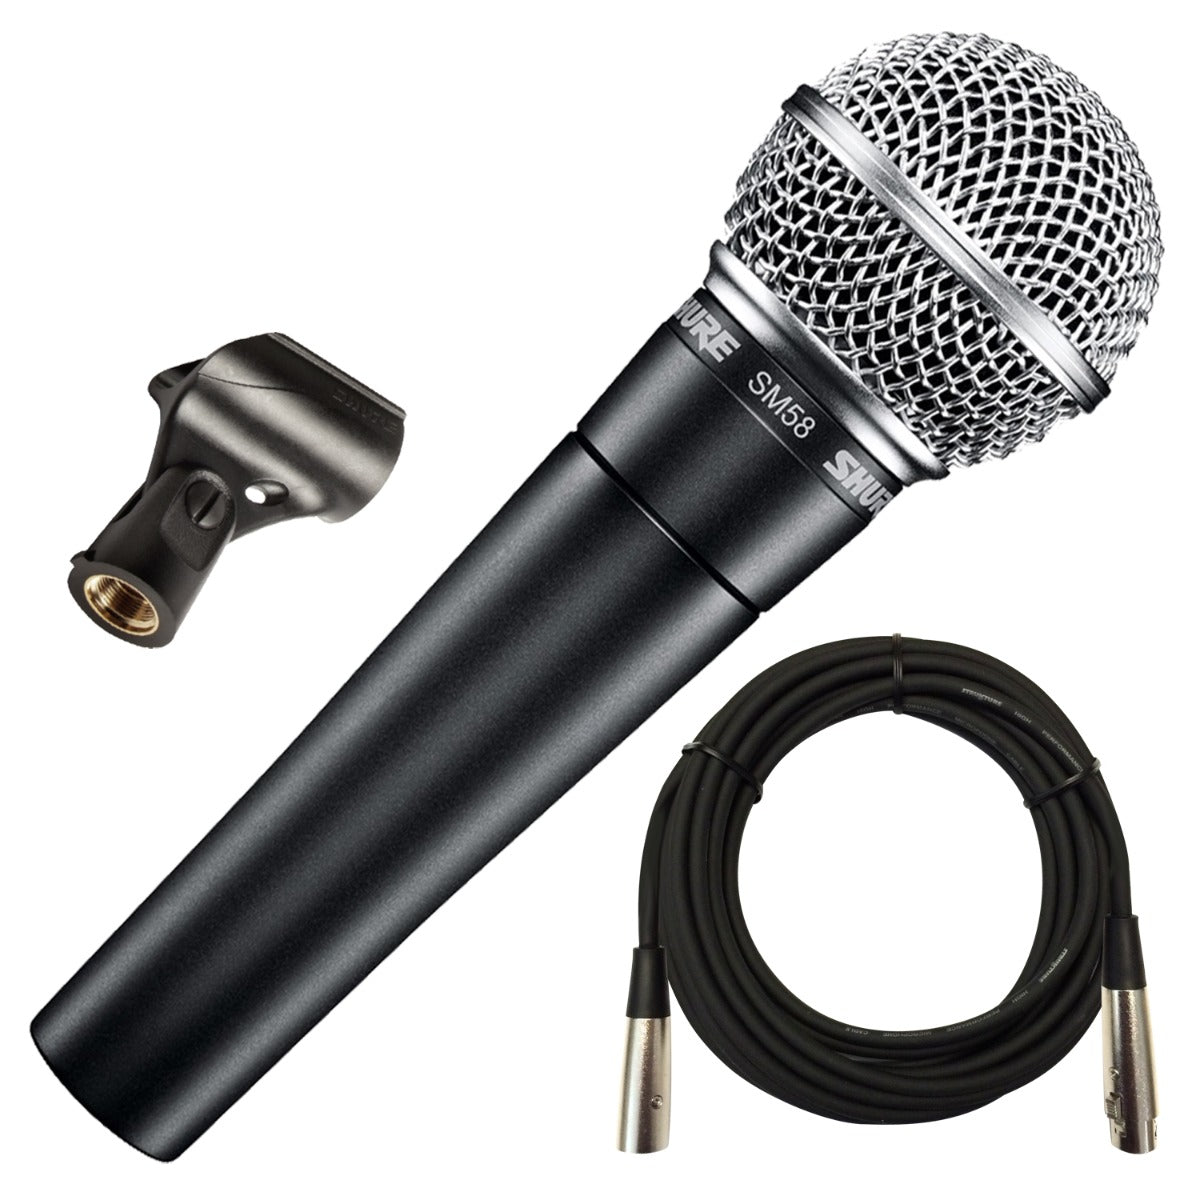 Shure SM58-LC Handheld Dynamic Vocal Microphone with Mic Cable Includes  Stand Adapter, Zippered Carrying Case